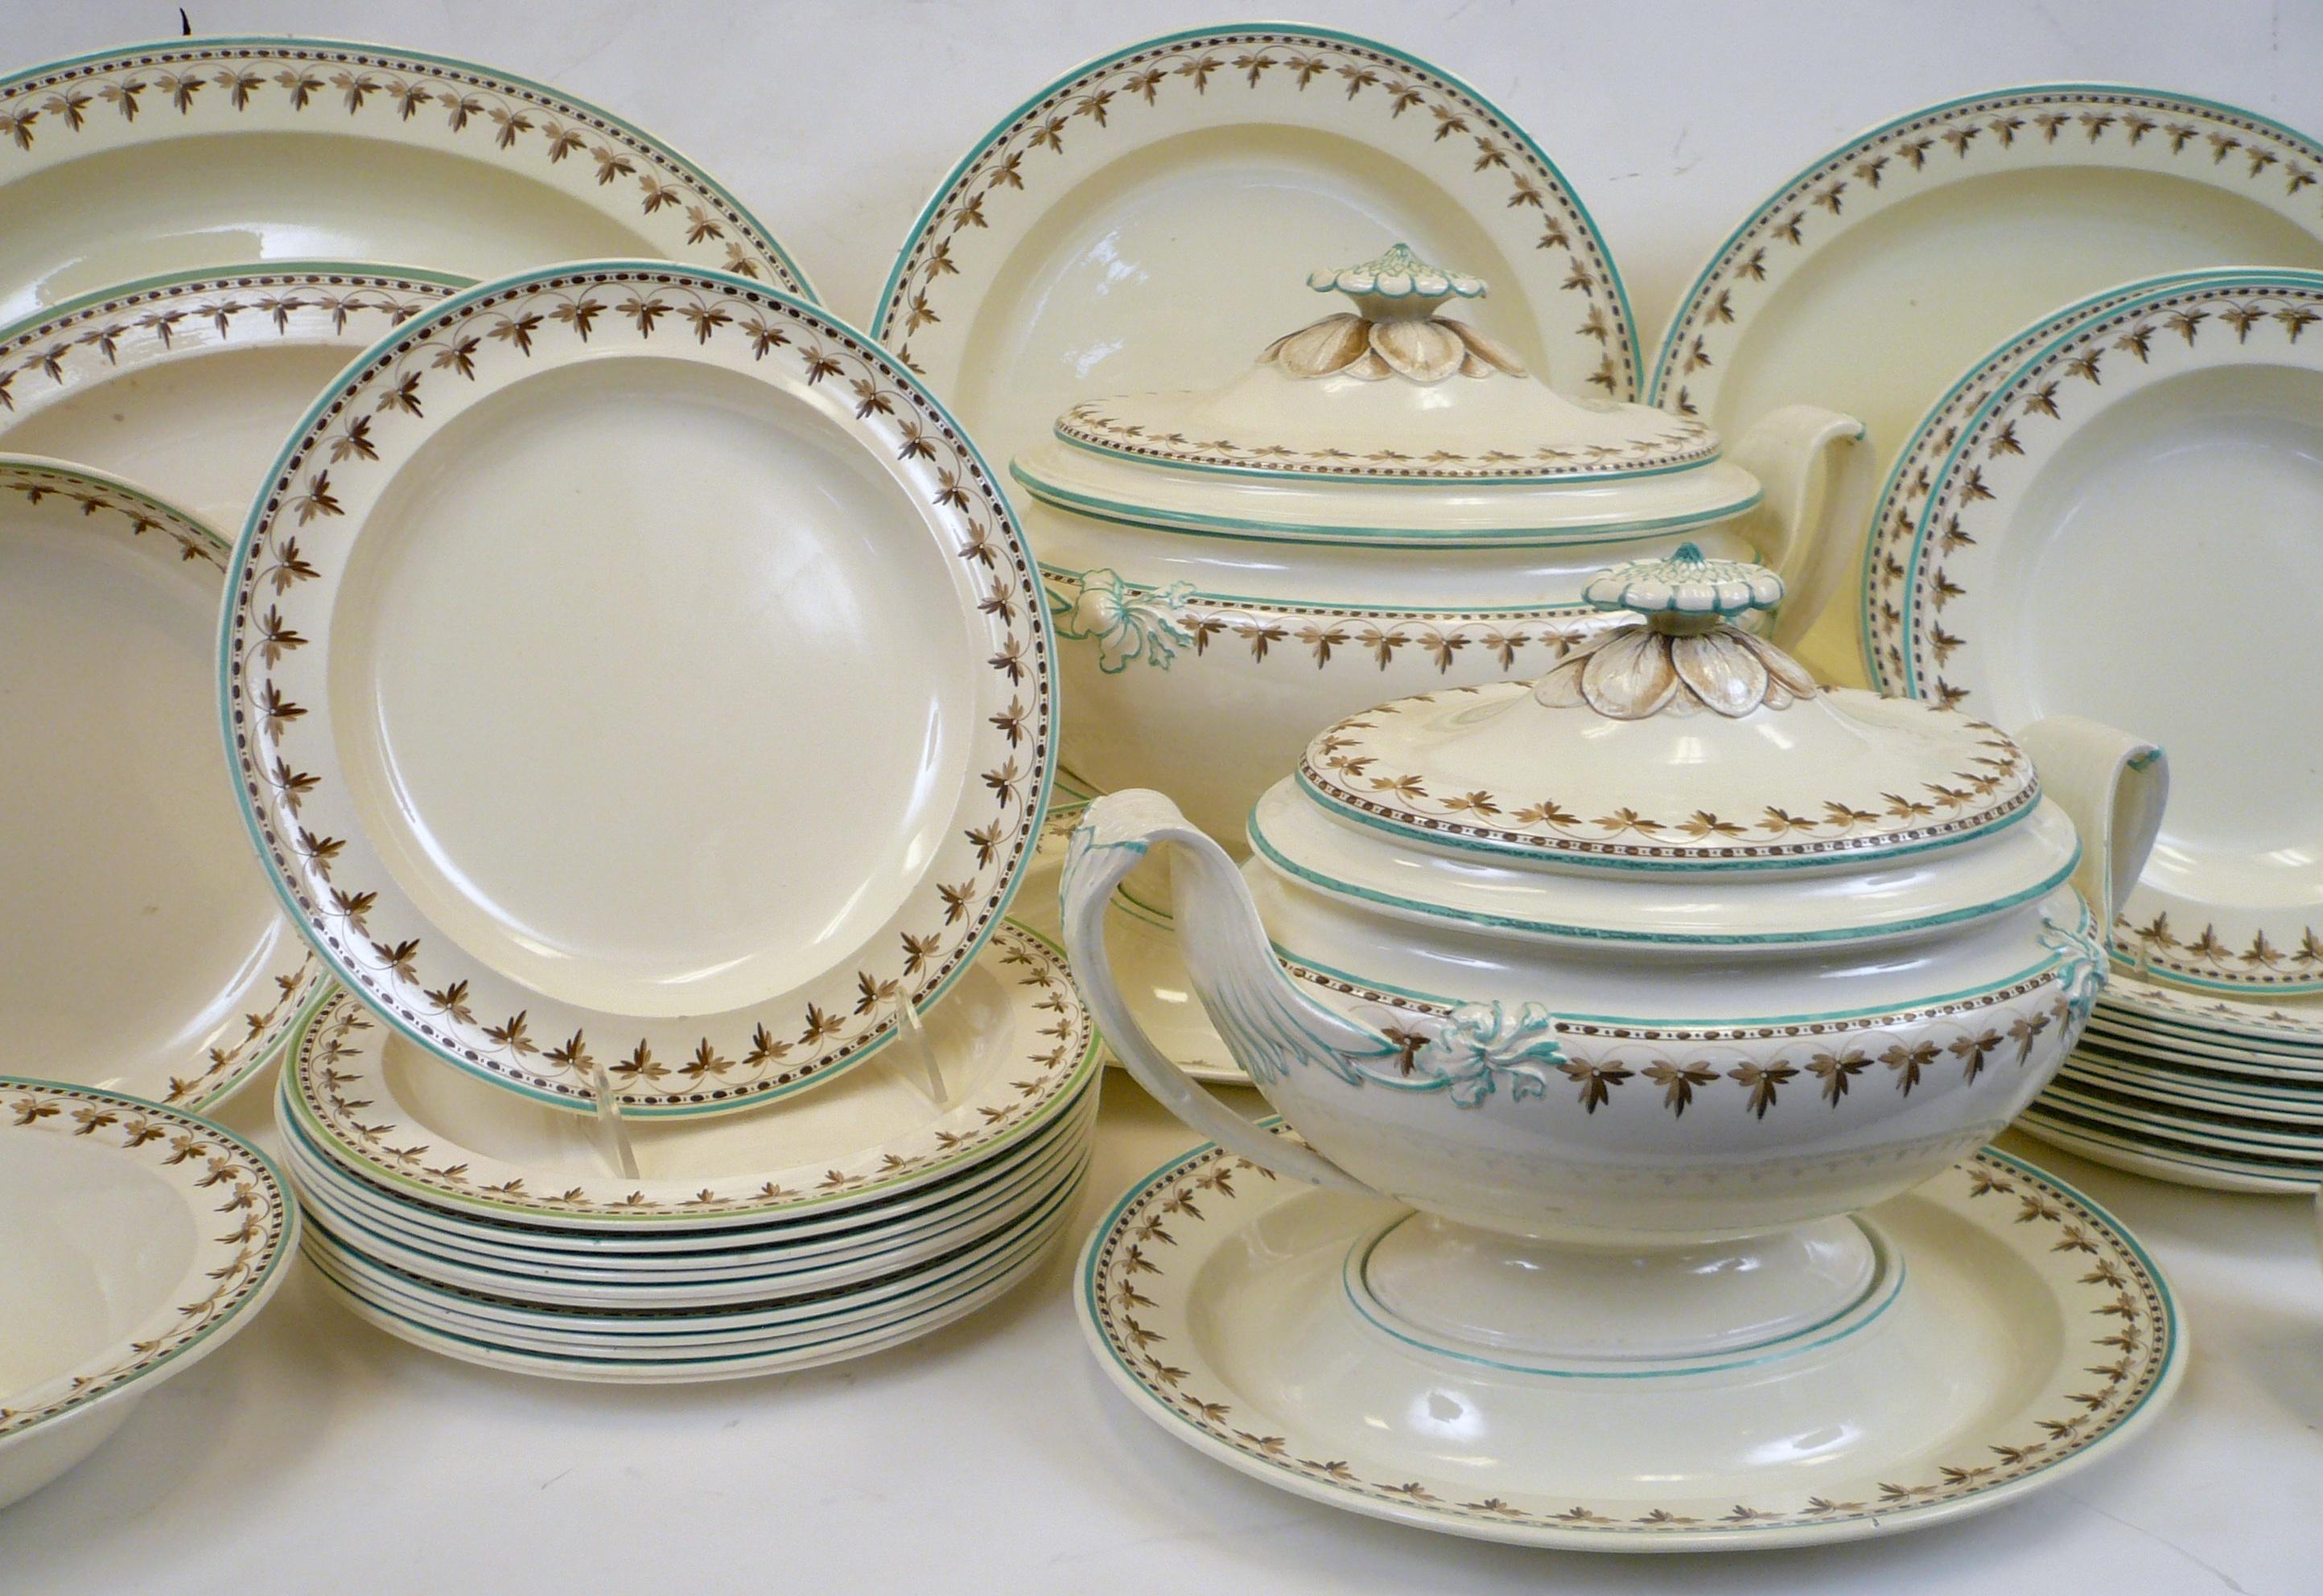 Neoclassical Large and Impressive Late 18th Century Wedgwood Creamware Dinner Service